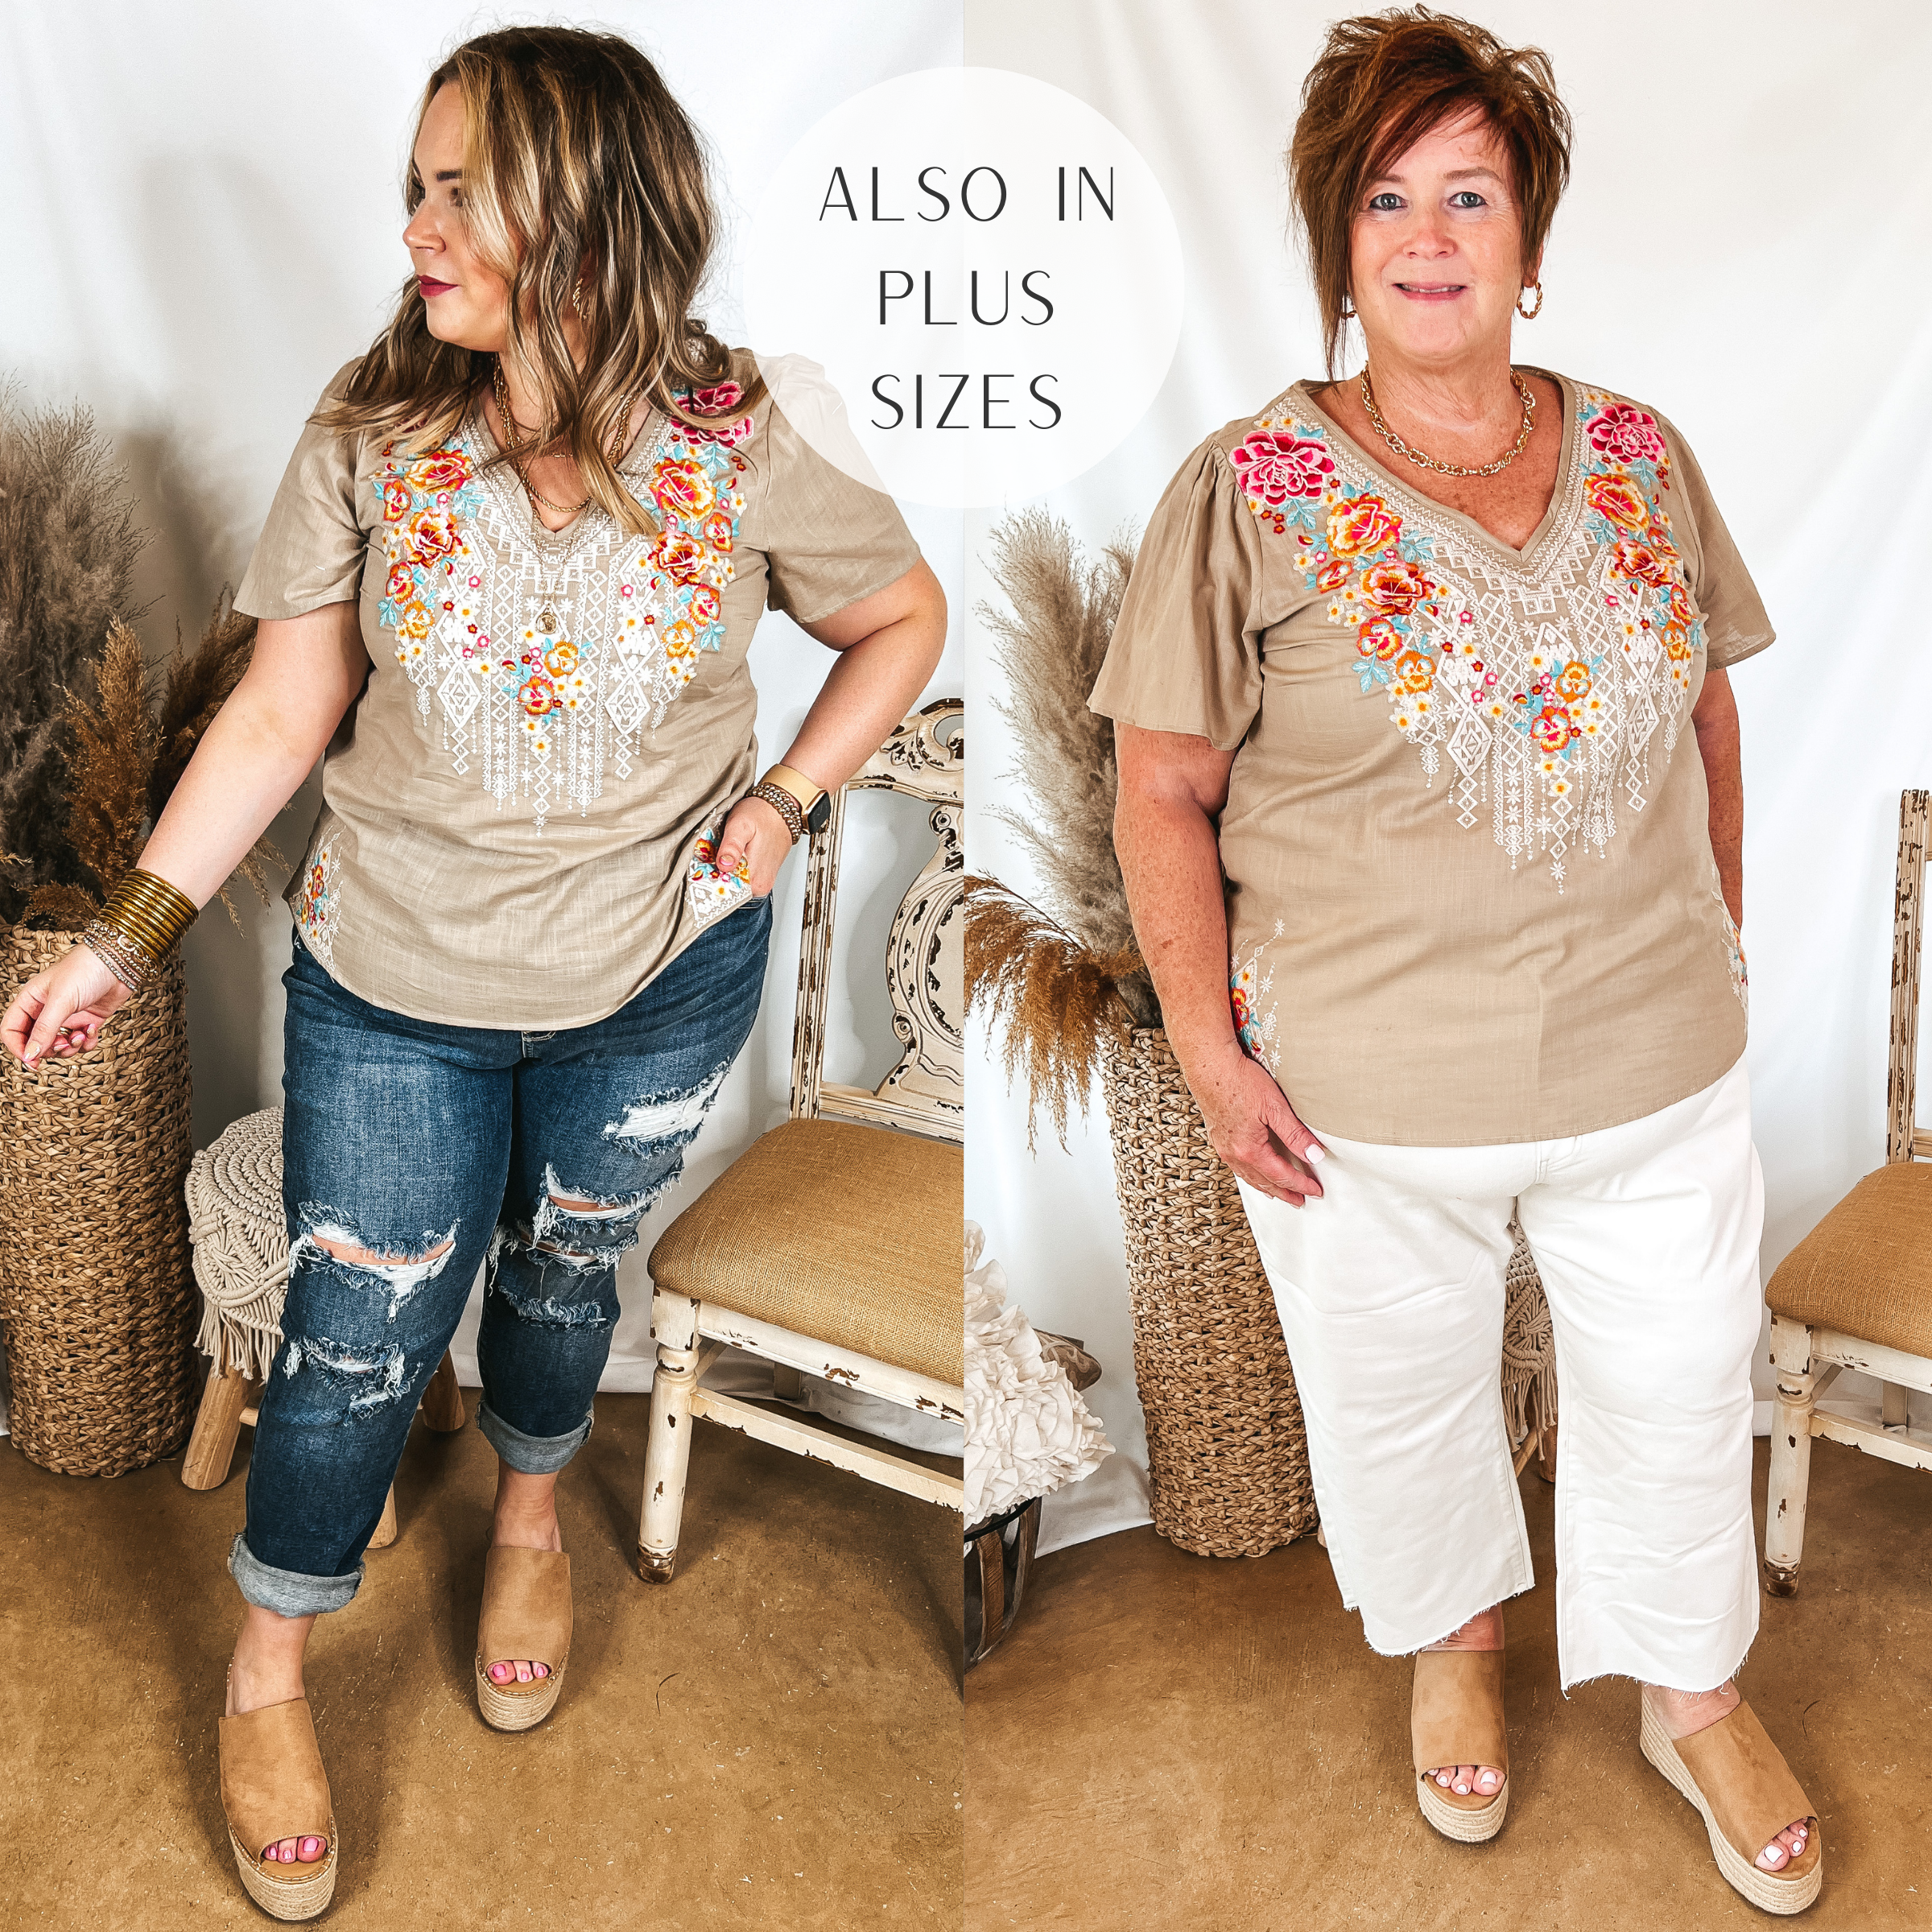 Models are wearing a beige short sleeve top with colorful embroidery. Size large model has it paired with distressed boyfriend jeans, tan wedges and gold jewelry. Plus size model has it paired with white cropped jeans, tan wedges, and gold jewelry.